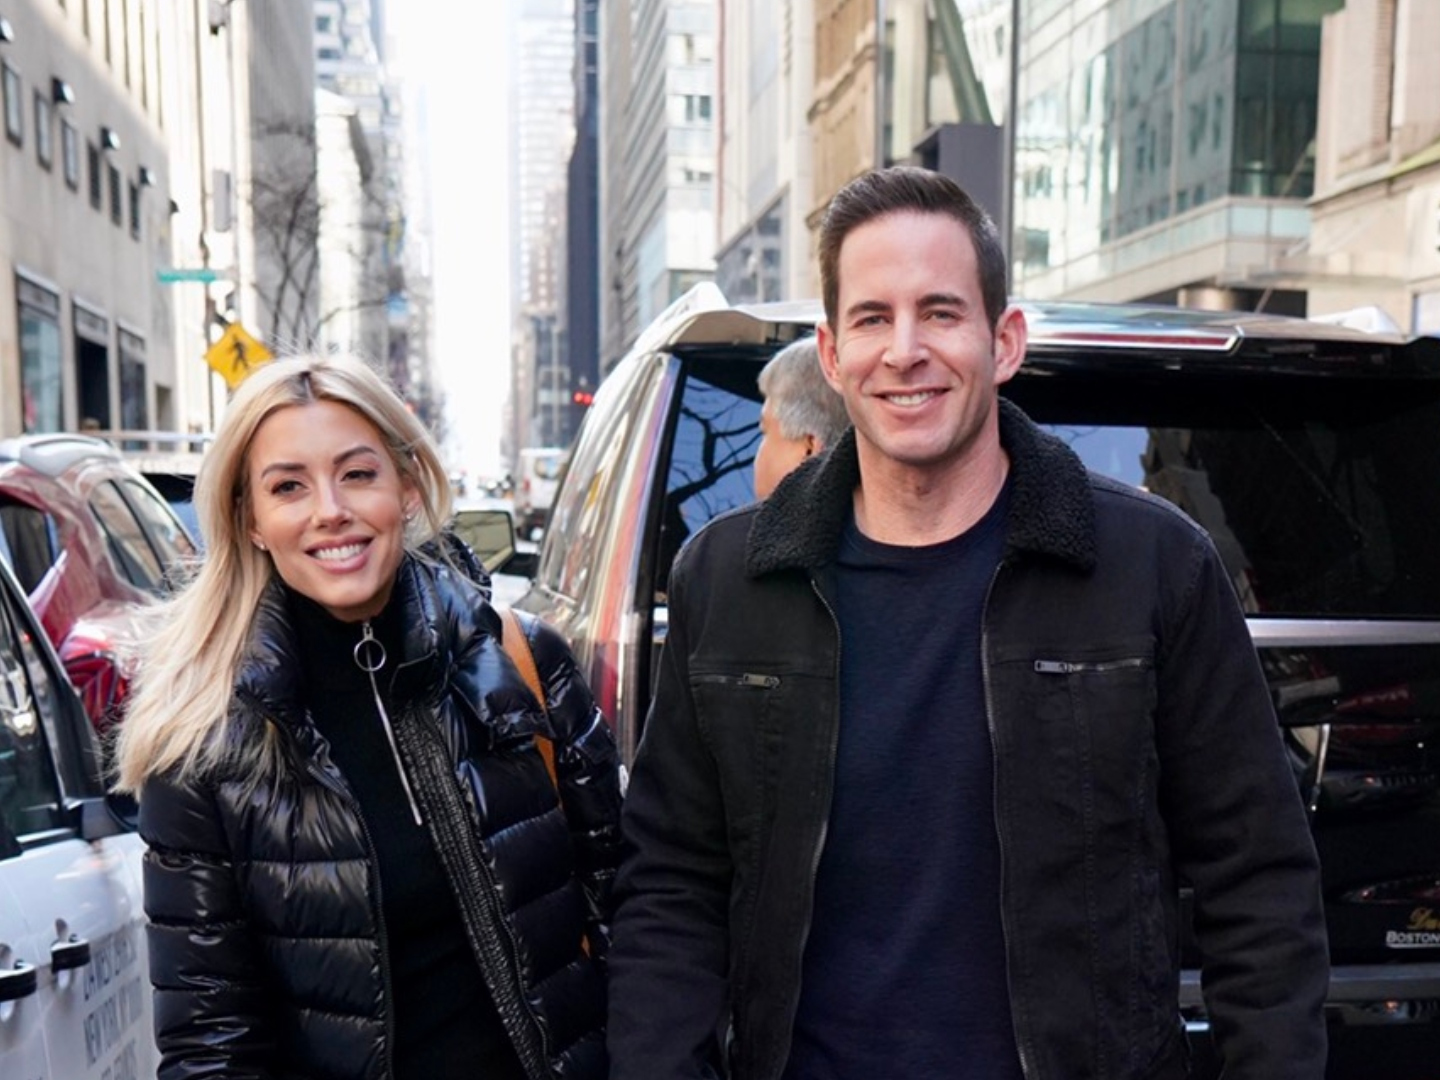 Tarek El Moussa Shared an Updated Family Photo With Heather Rae Young & His Kids With Christina Haack